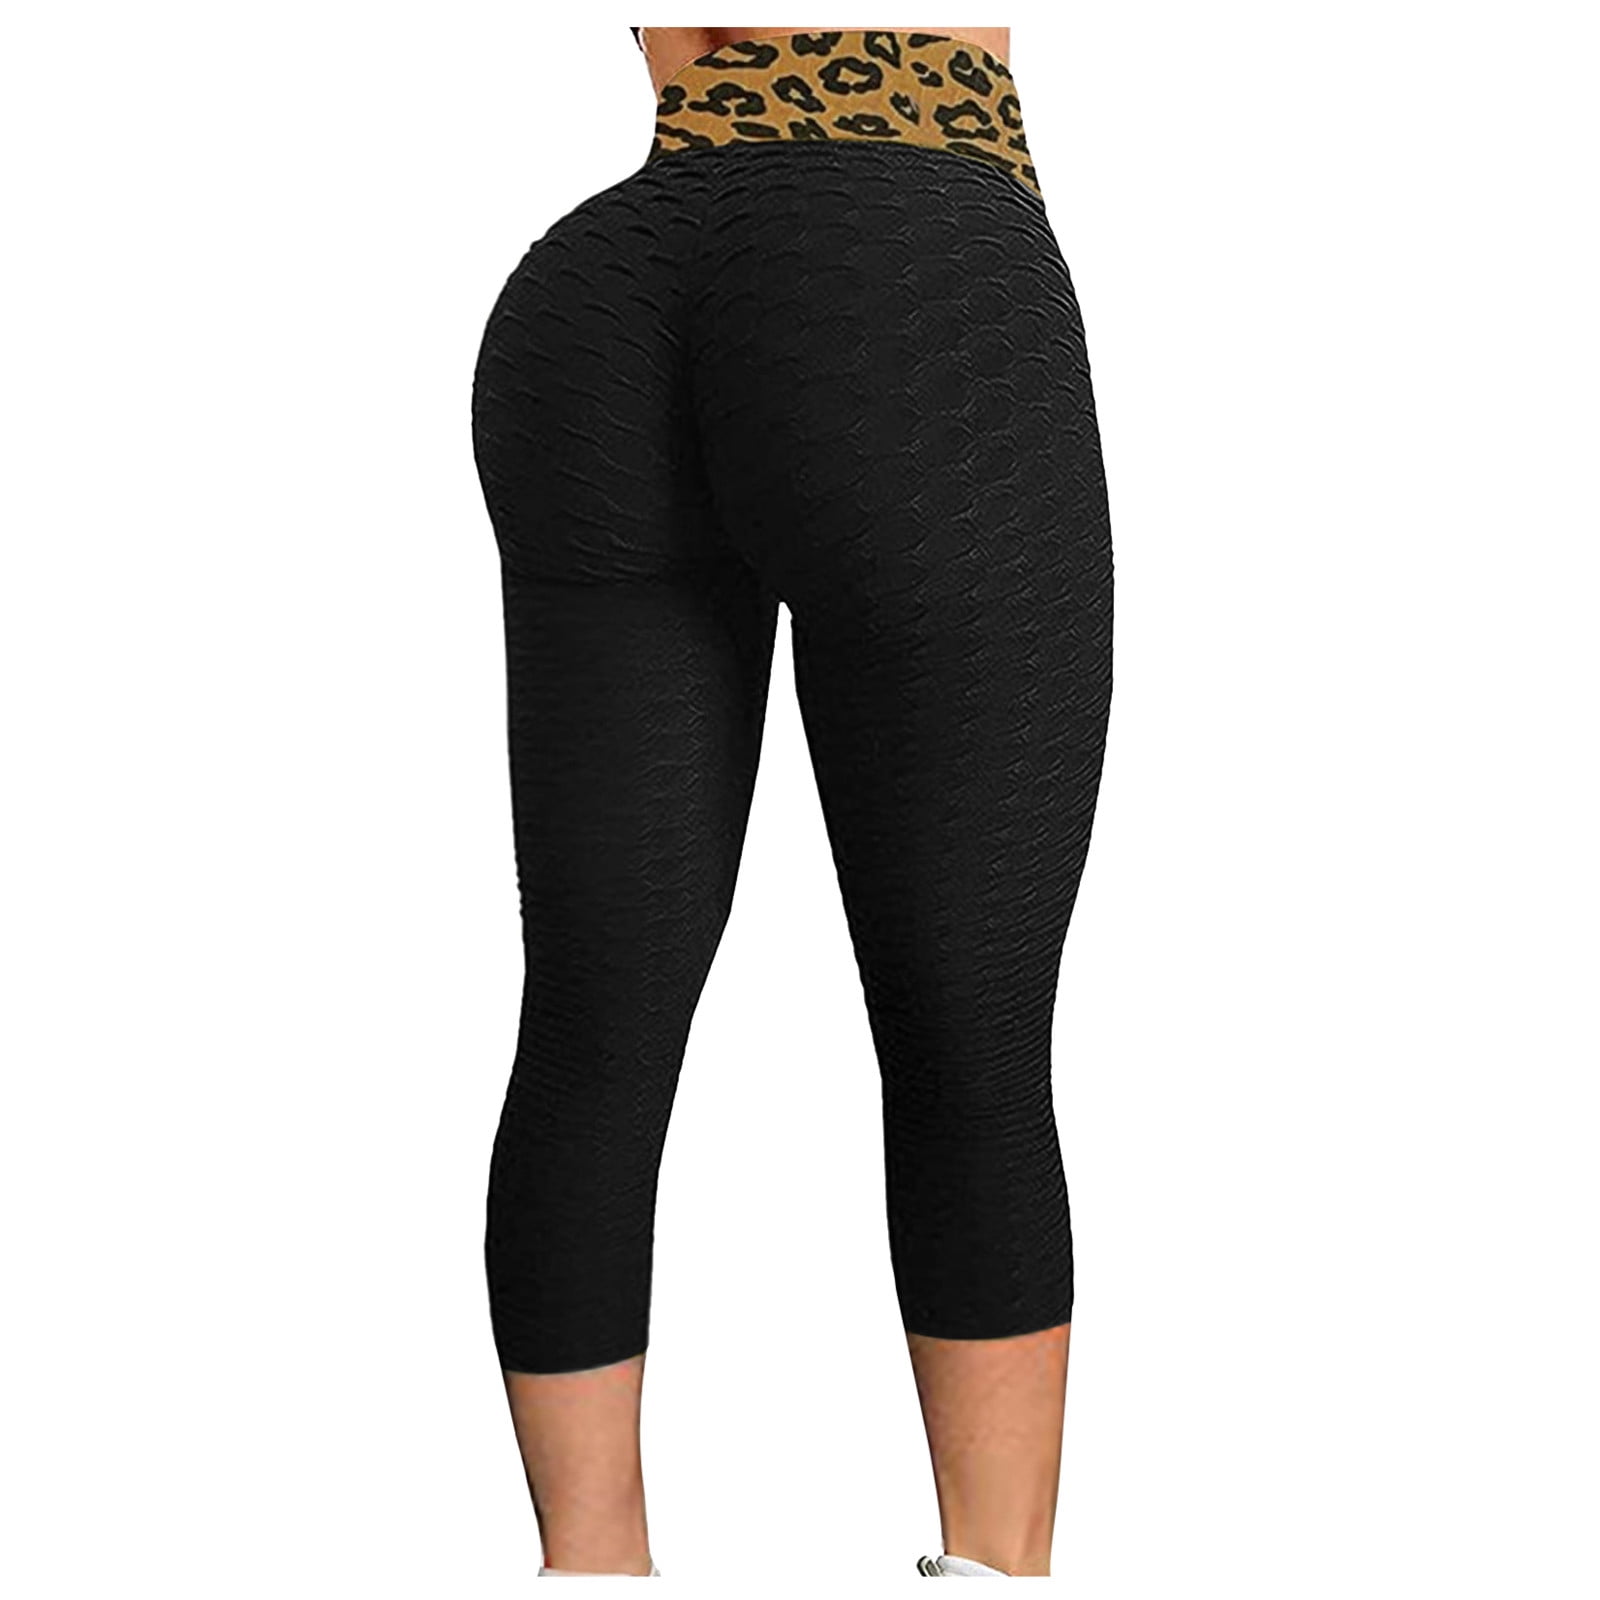  Boho Clothing Butt Lifting Shapewear Plus Size Maternity Pants  Womens Athletic Leggings Running Girl Plus Size Capris for Women 3X-4X  White Compression Pants Running Clothes(Black,Small) : Sports & Outdoors